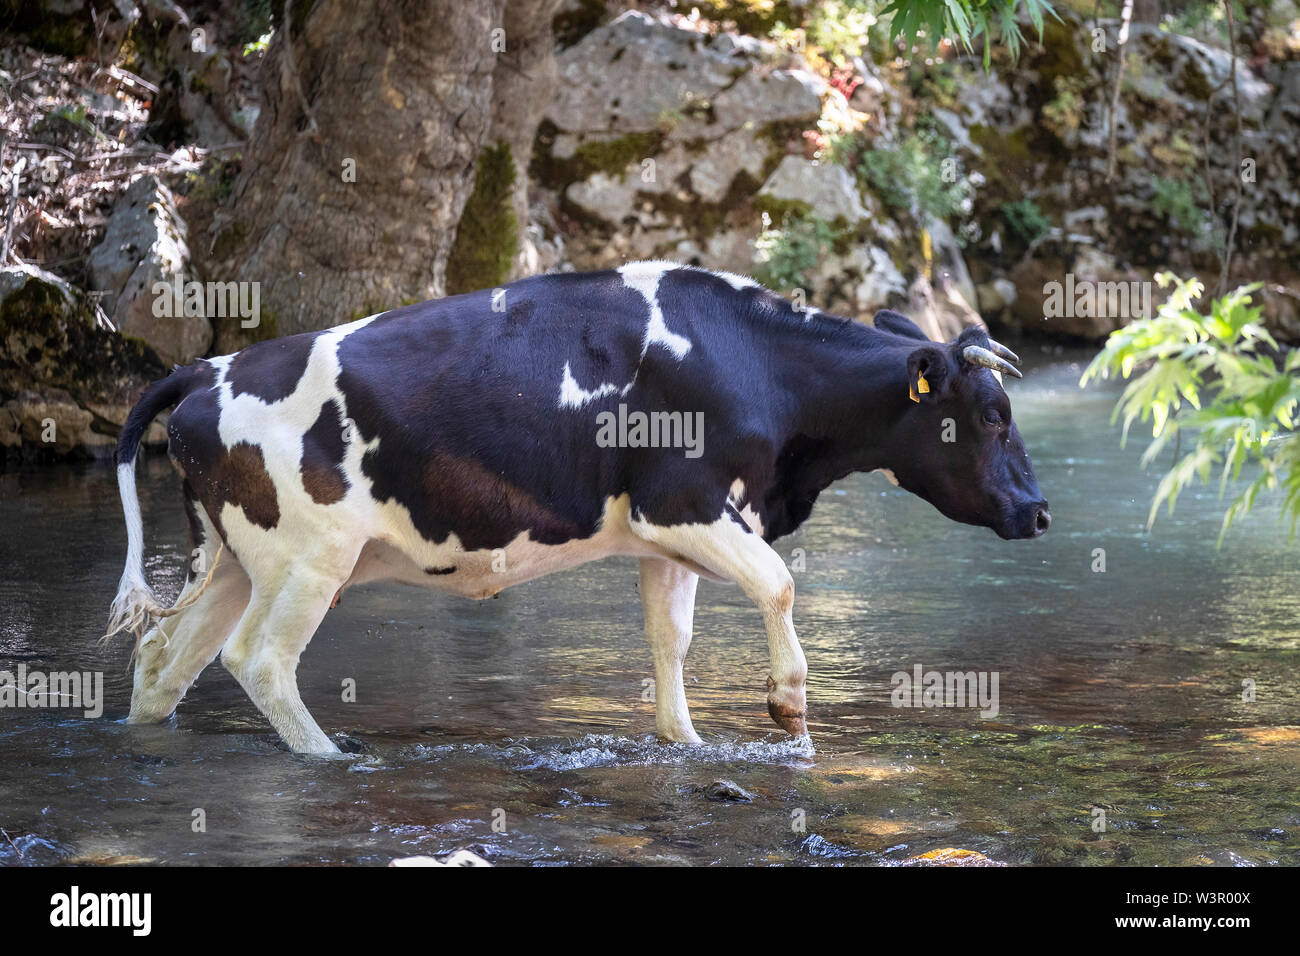 Domestic Cattle. Free-ranging black and white cattle. Cow crossing a stream. Einfyayla, Turkey Stock Photo